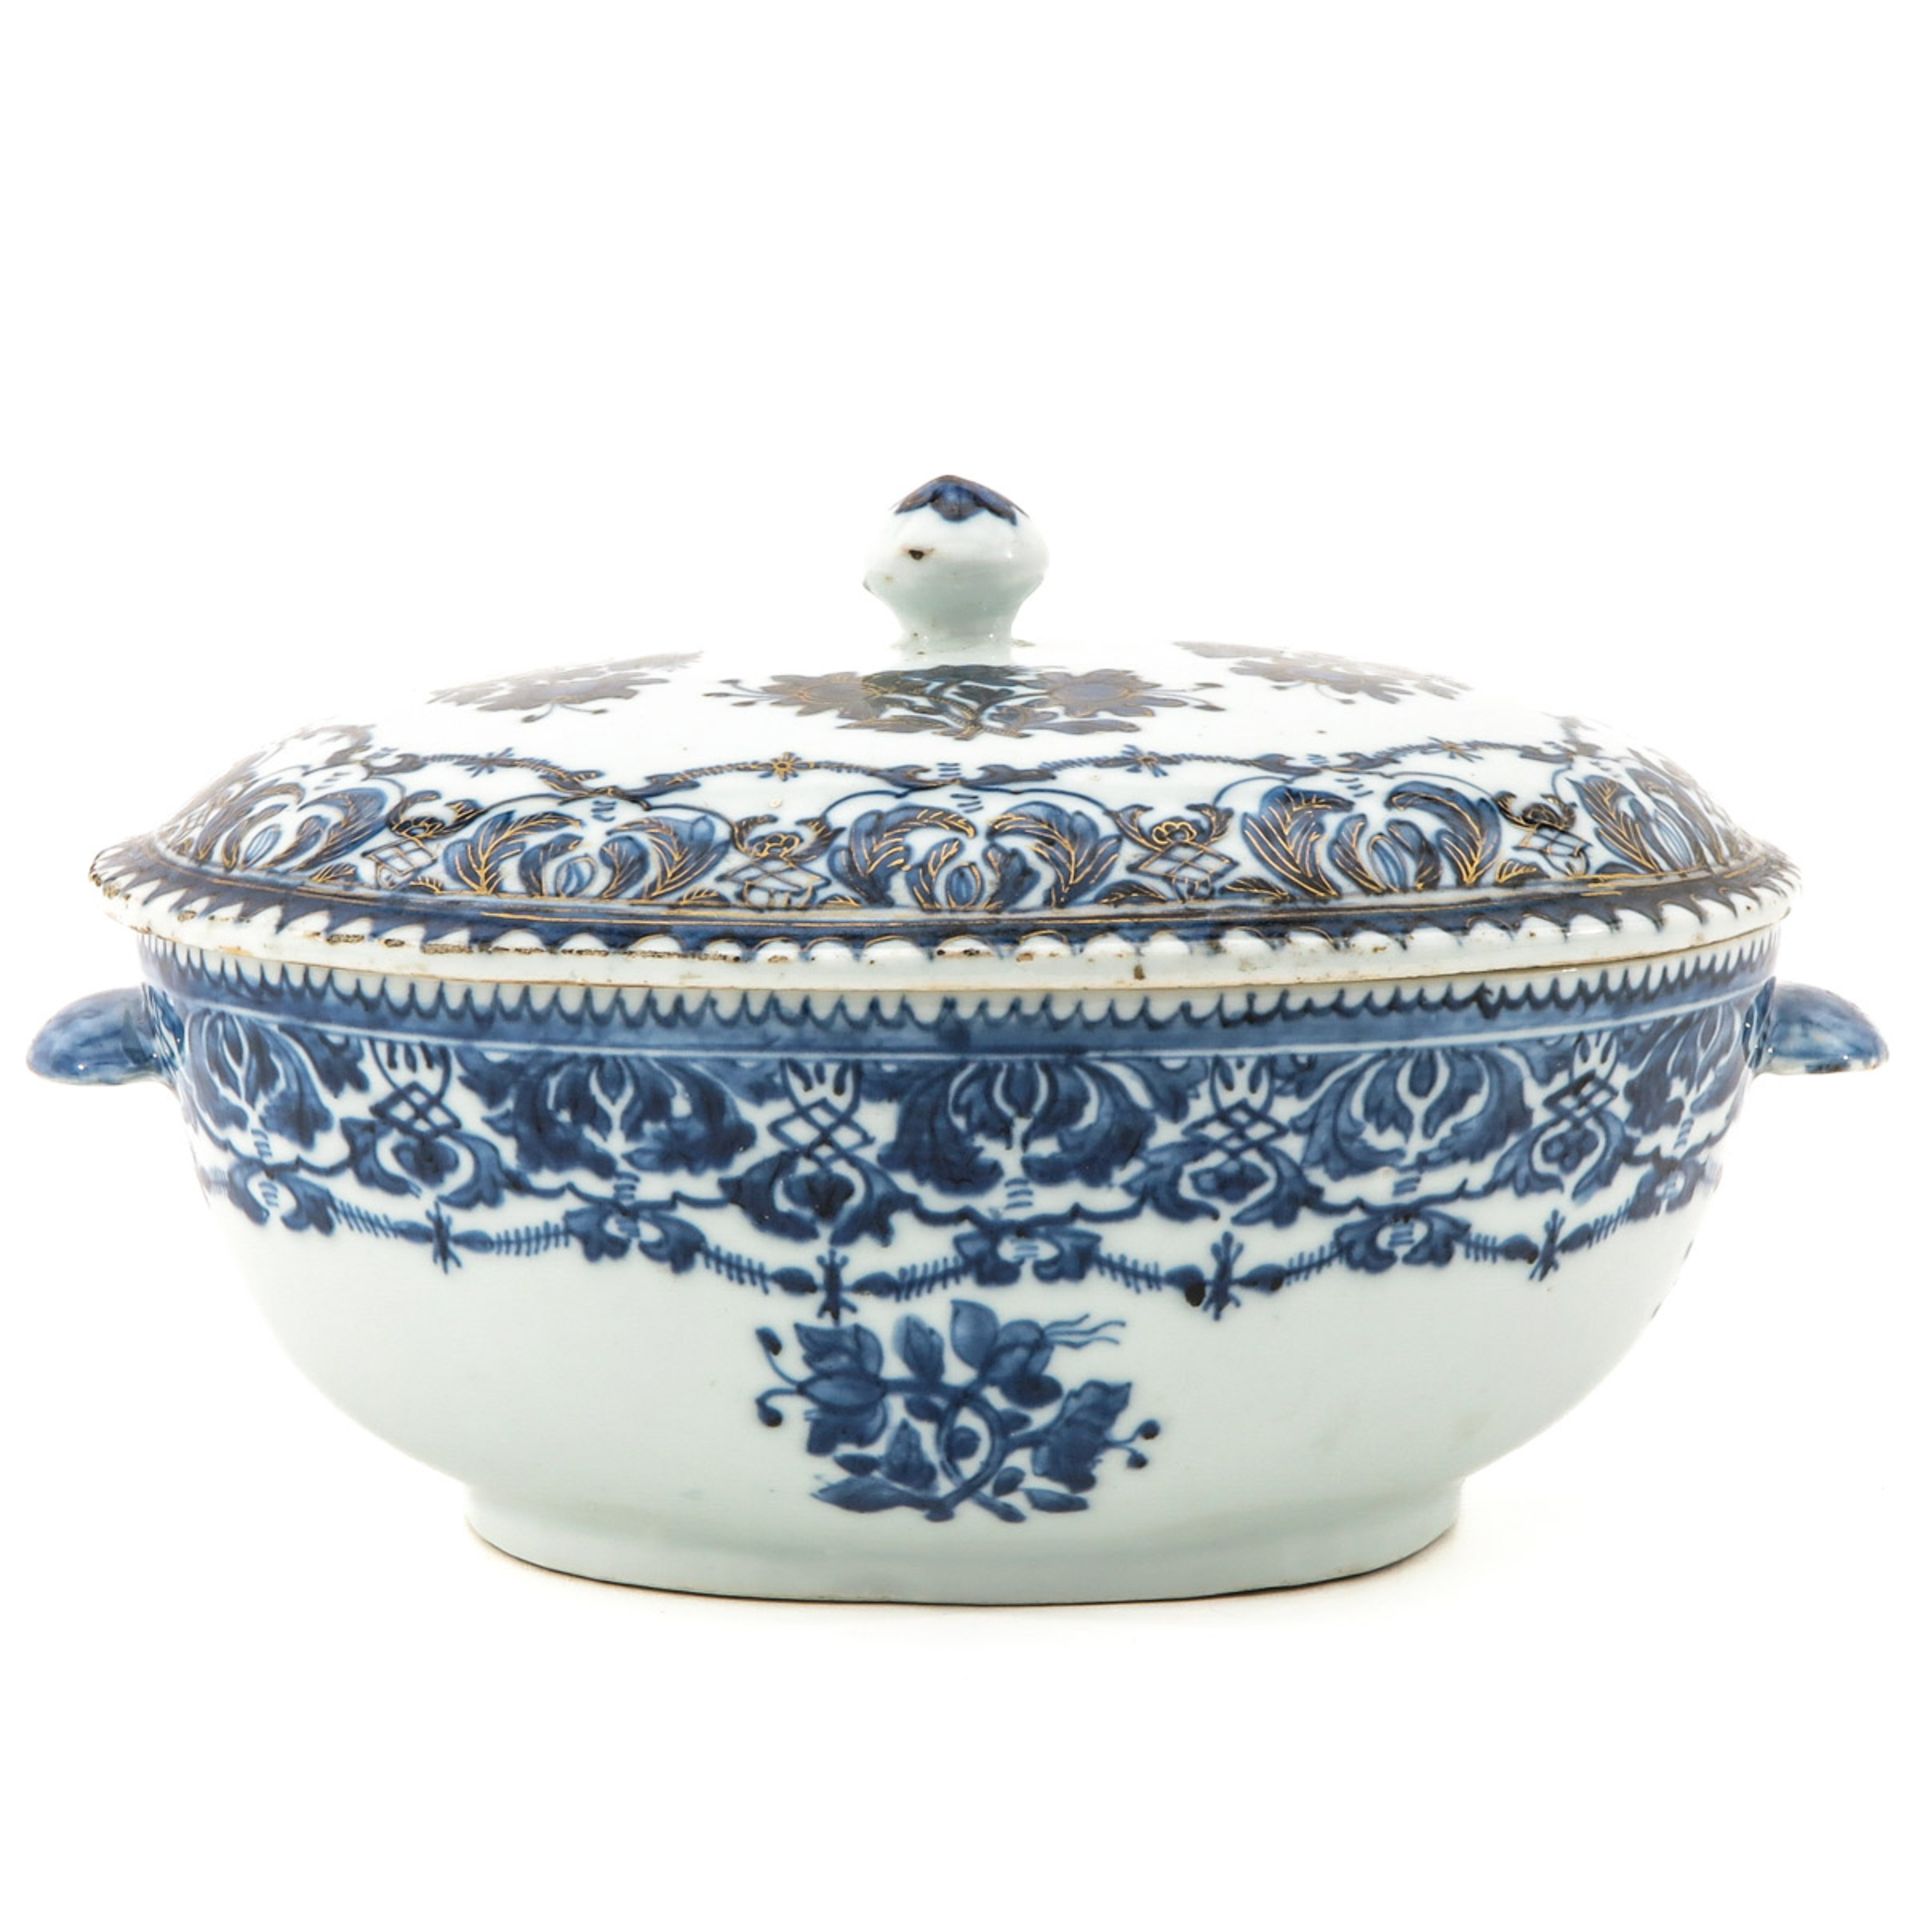 An Oval Tureen with Cover